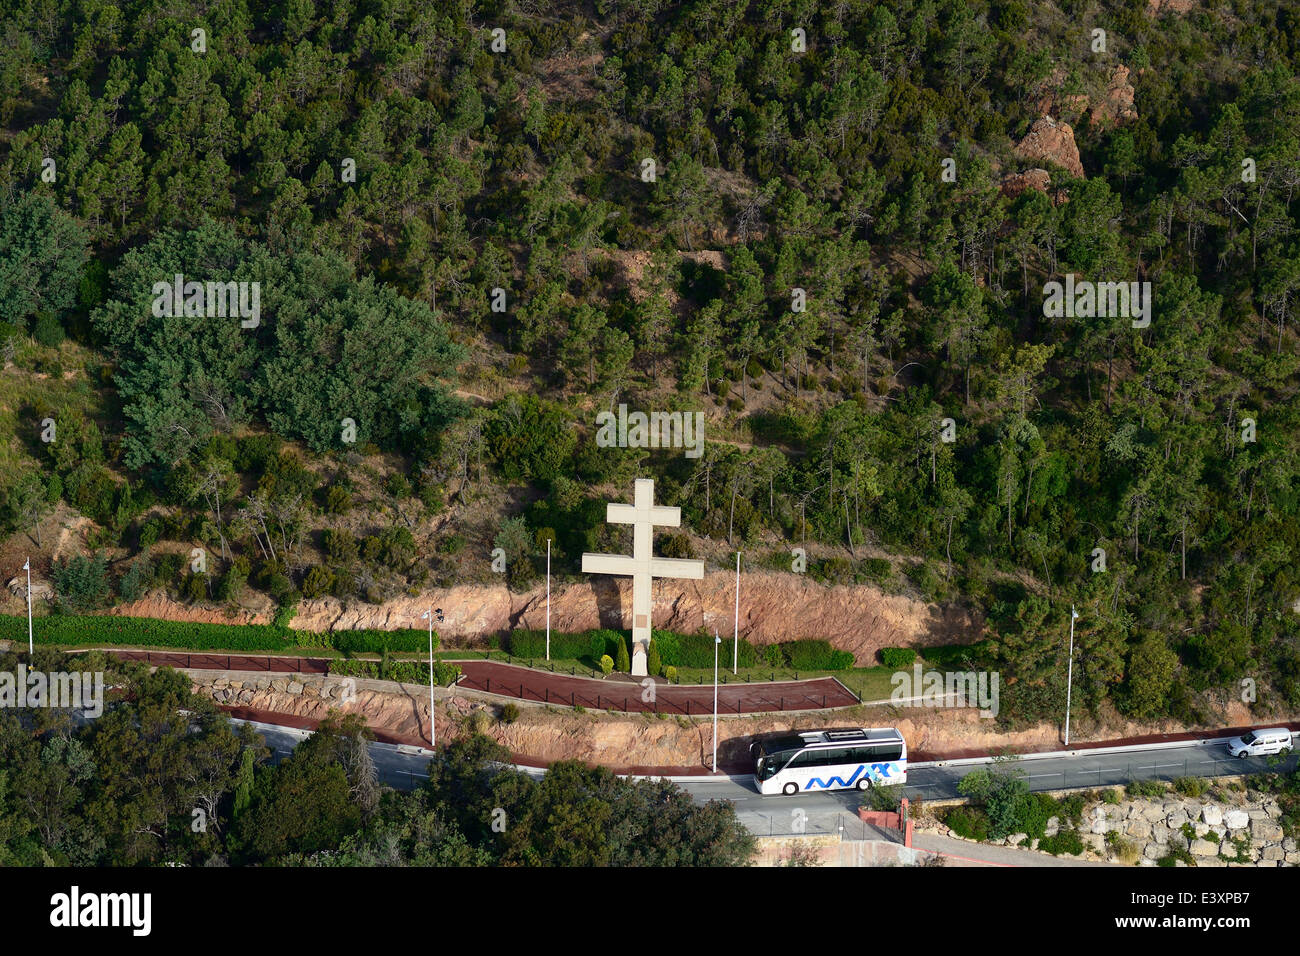 AERIAL VIEW. Cross of Lorraine, a WWII memorial. Théoule-sur-Mer, Estérel Massif, Alpes-Maritimes, French Riviera, France. Stock Photo